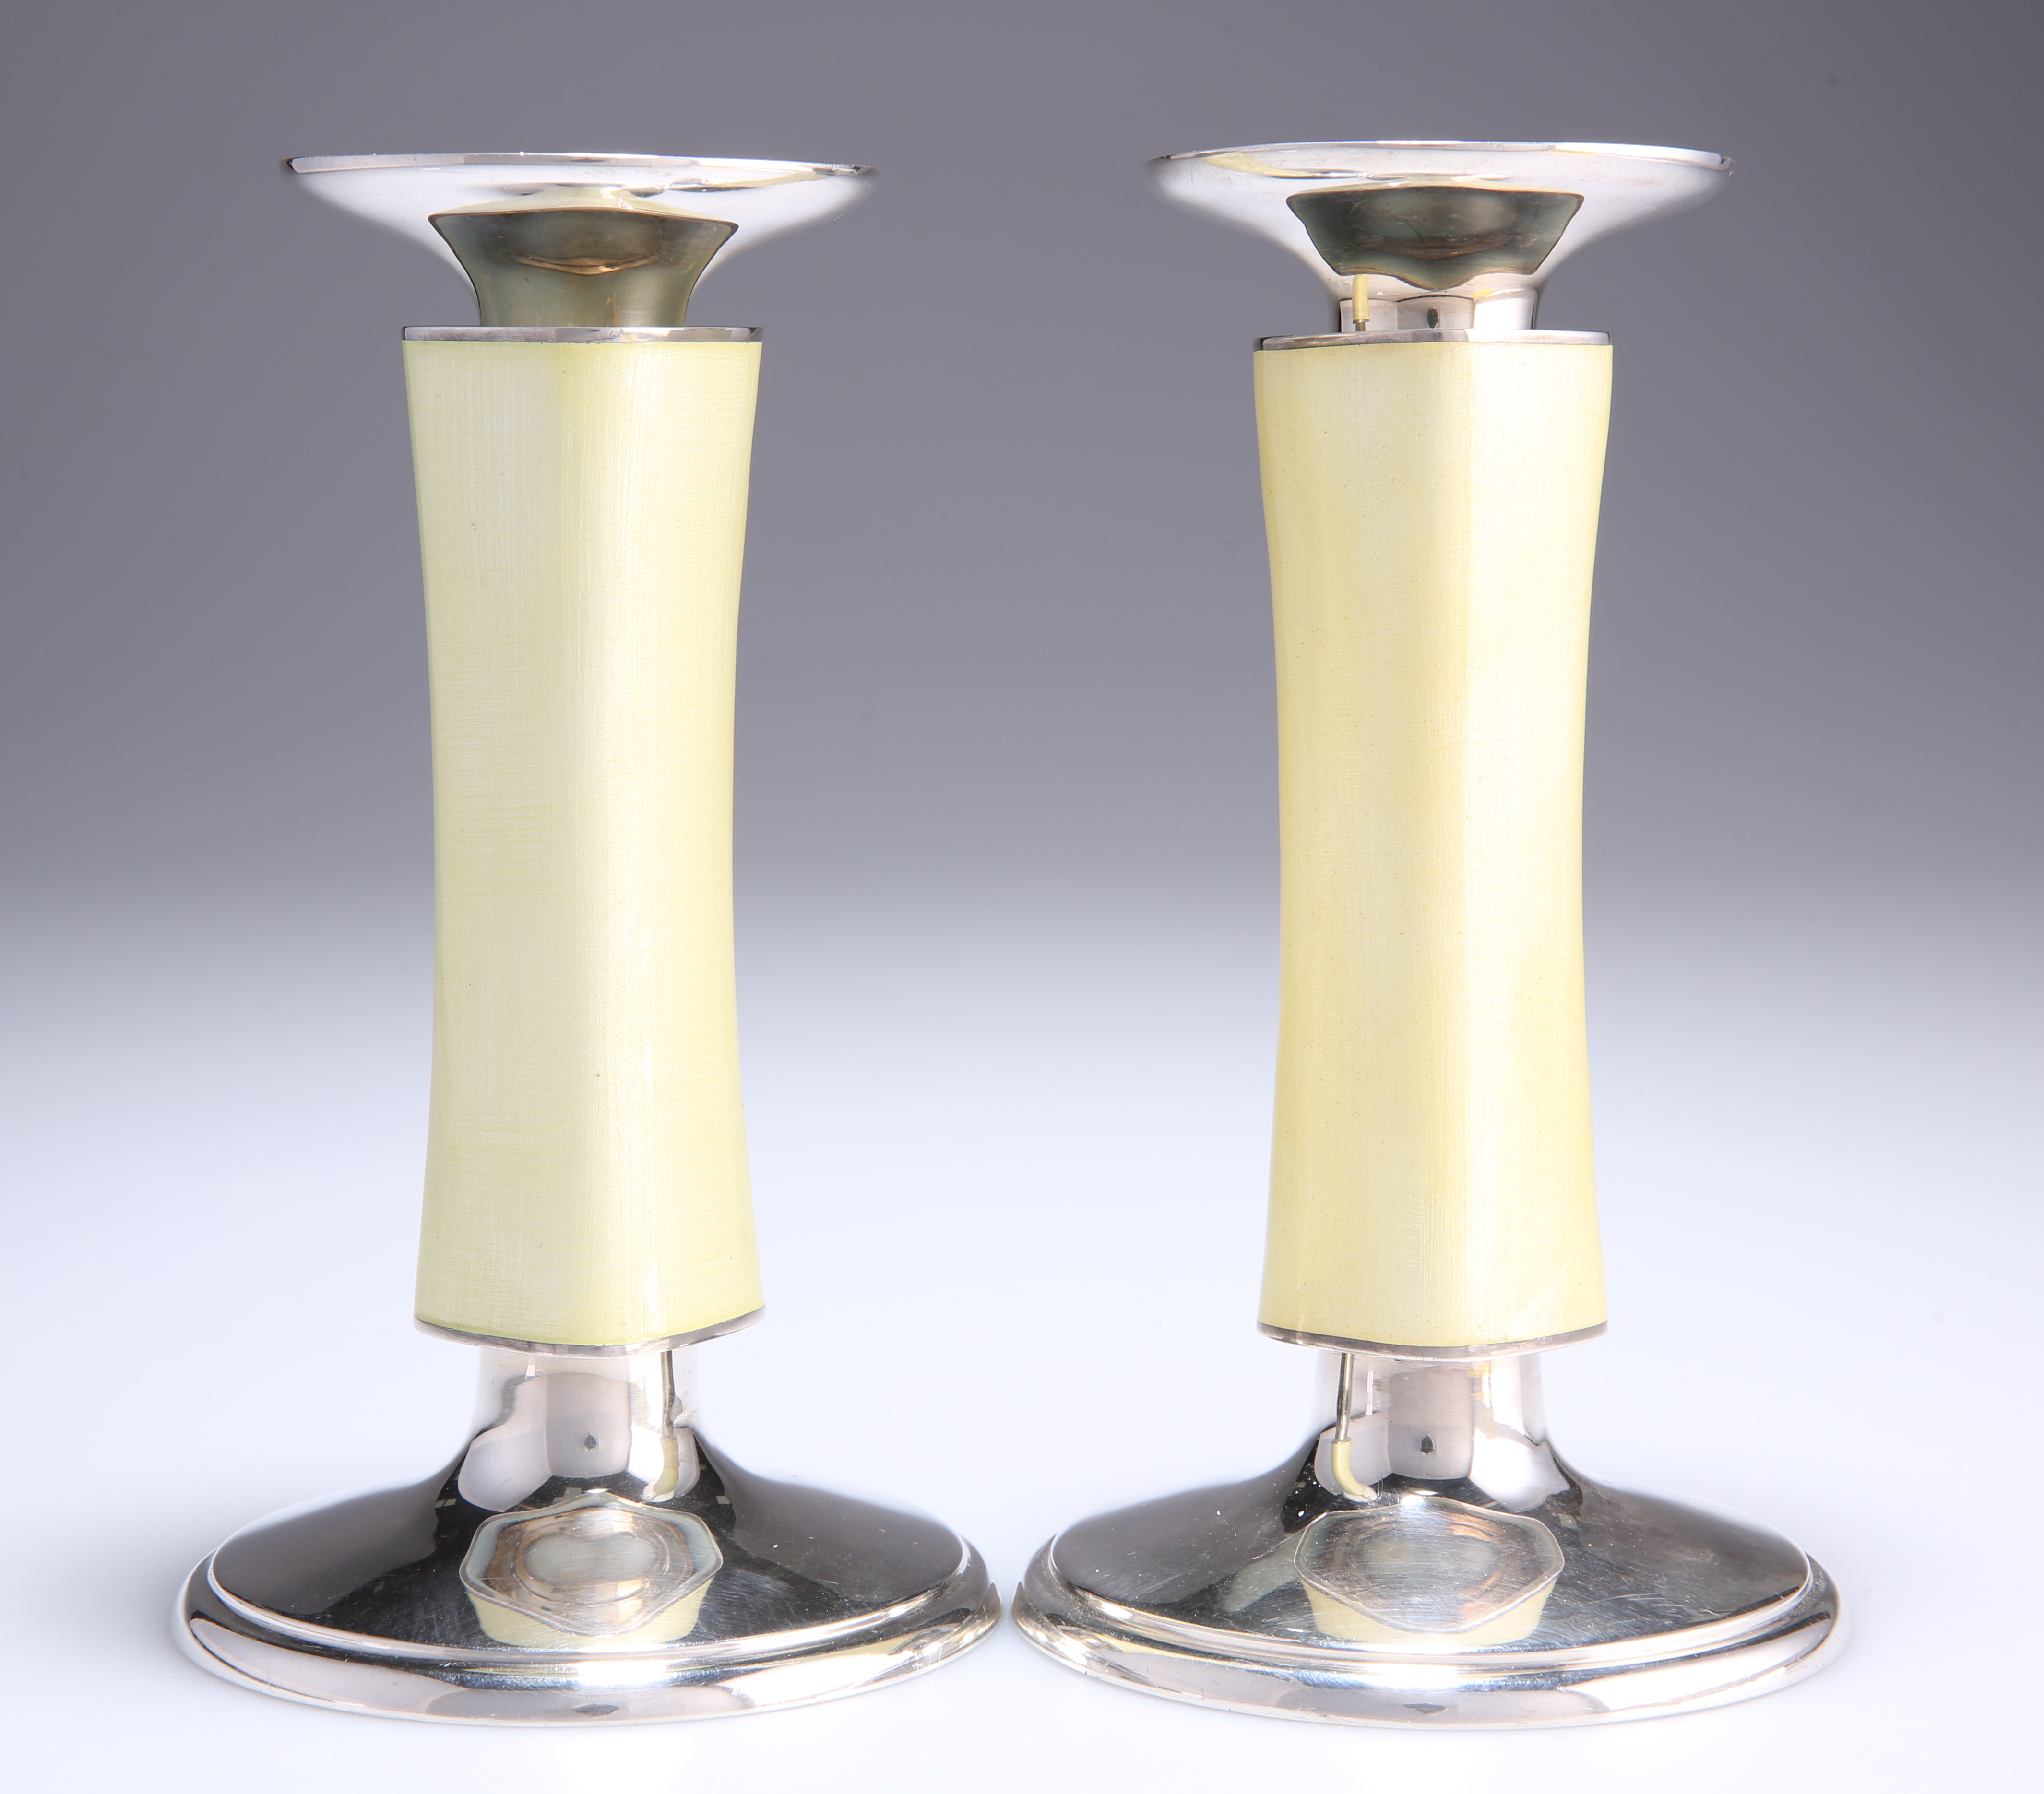 MEISTER, ZURICH, A PAIR OF SWISS SILVER AND ENAMEL CANDLESTICKS, CIRCA 1960